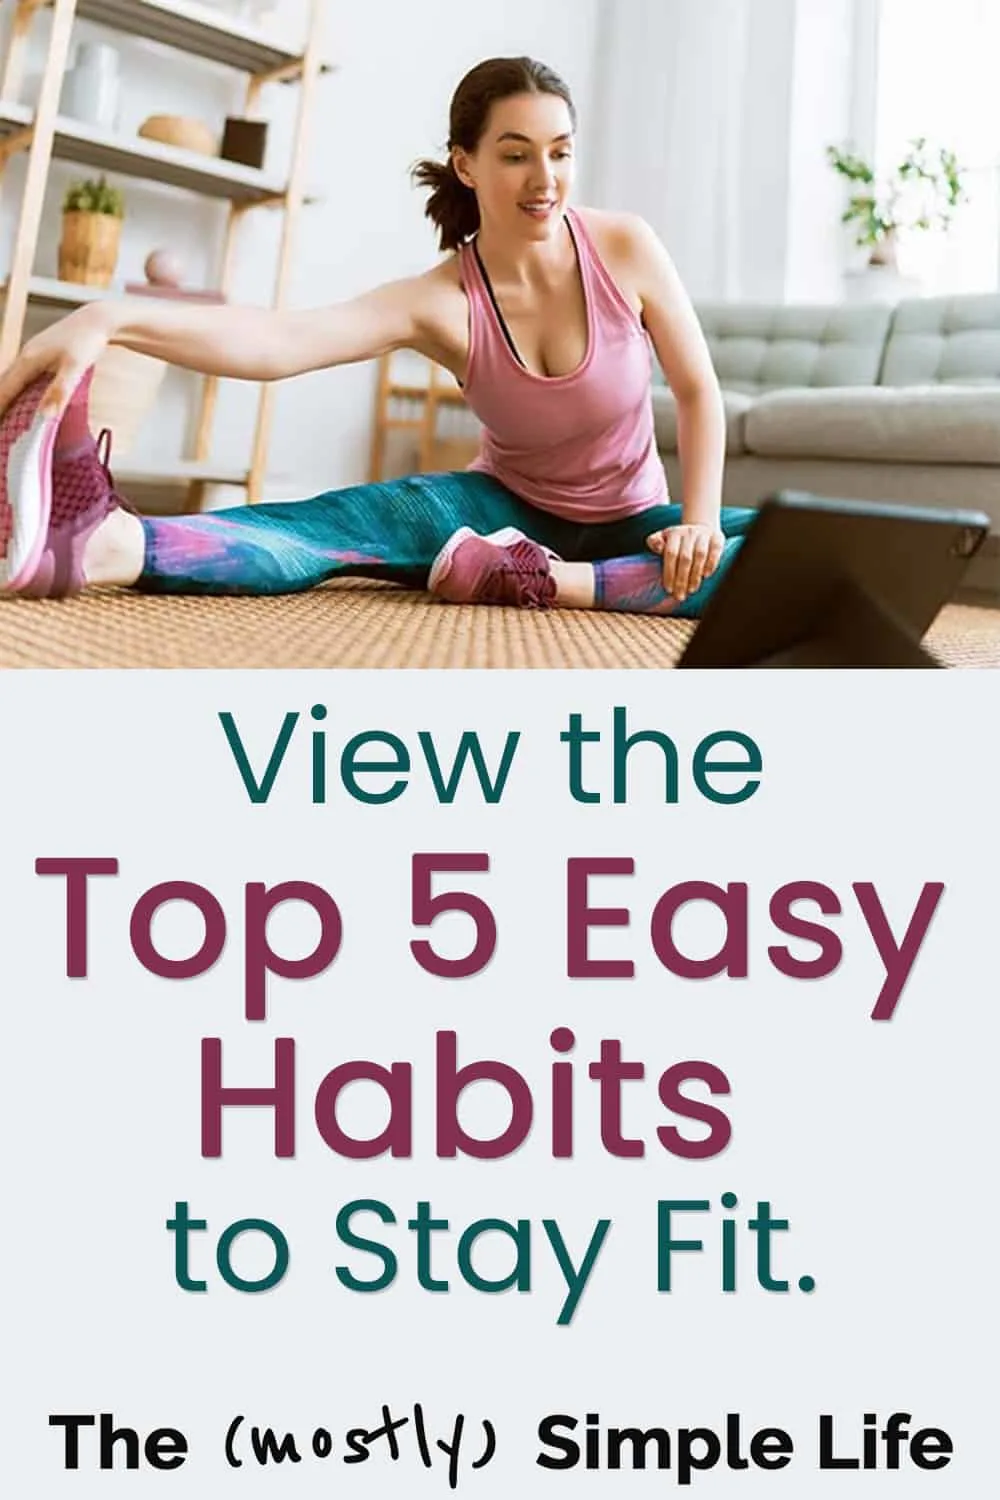 The 5 Easiest Habits to Keep a Physically Active Lifestyle ... and Stay Fit.